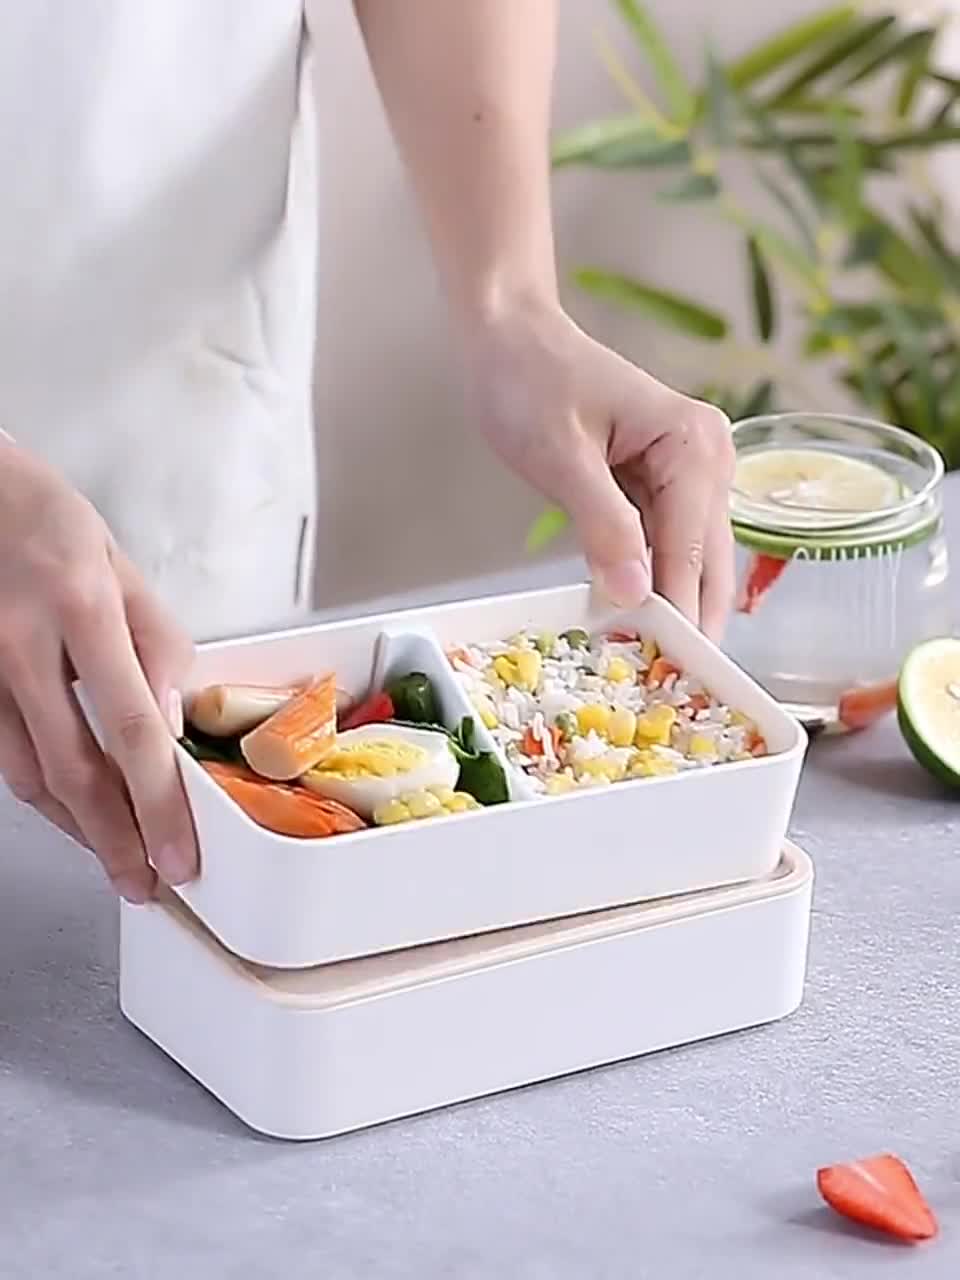 Evjurcn Bento Adults Kids Lunch Box, Iteryn Stackable Bento Box, 3-in-1 Compartment - Wheat Straw, Leakproof Eco-Friendly Bento Lunch Box Meal Prep